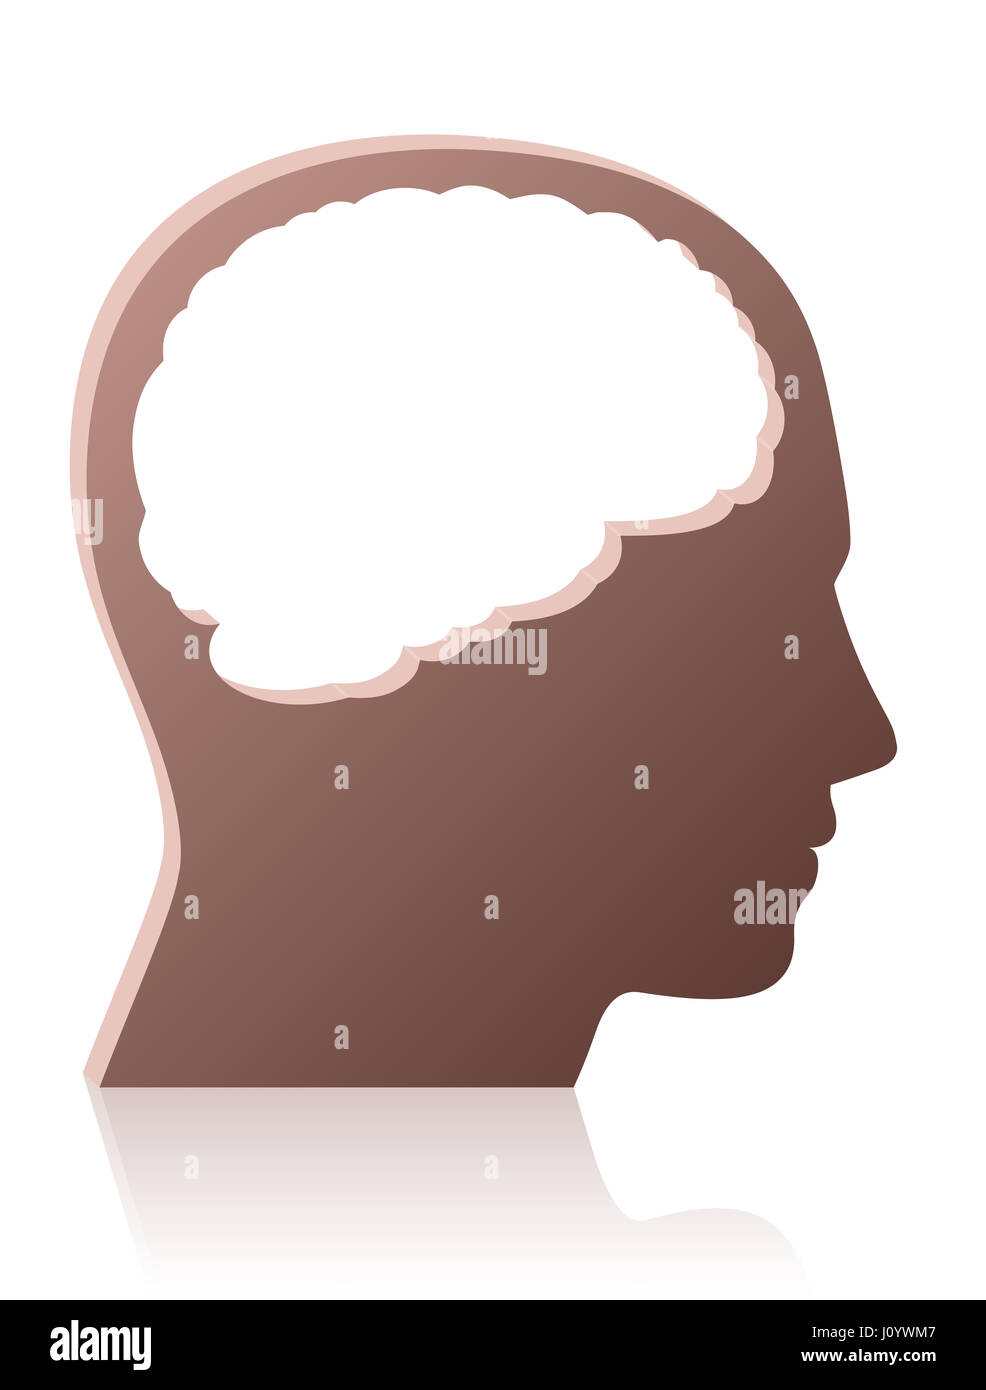 Brainless, mindless, unintelligent, foolish, silly, stupid person, symbolized by a head with a big brain shaped empty hole - isolated  illustration. Stock Photo